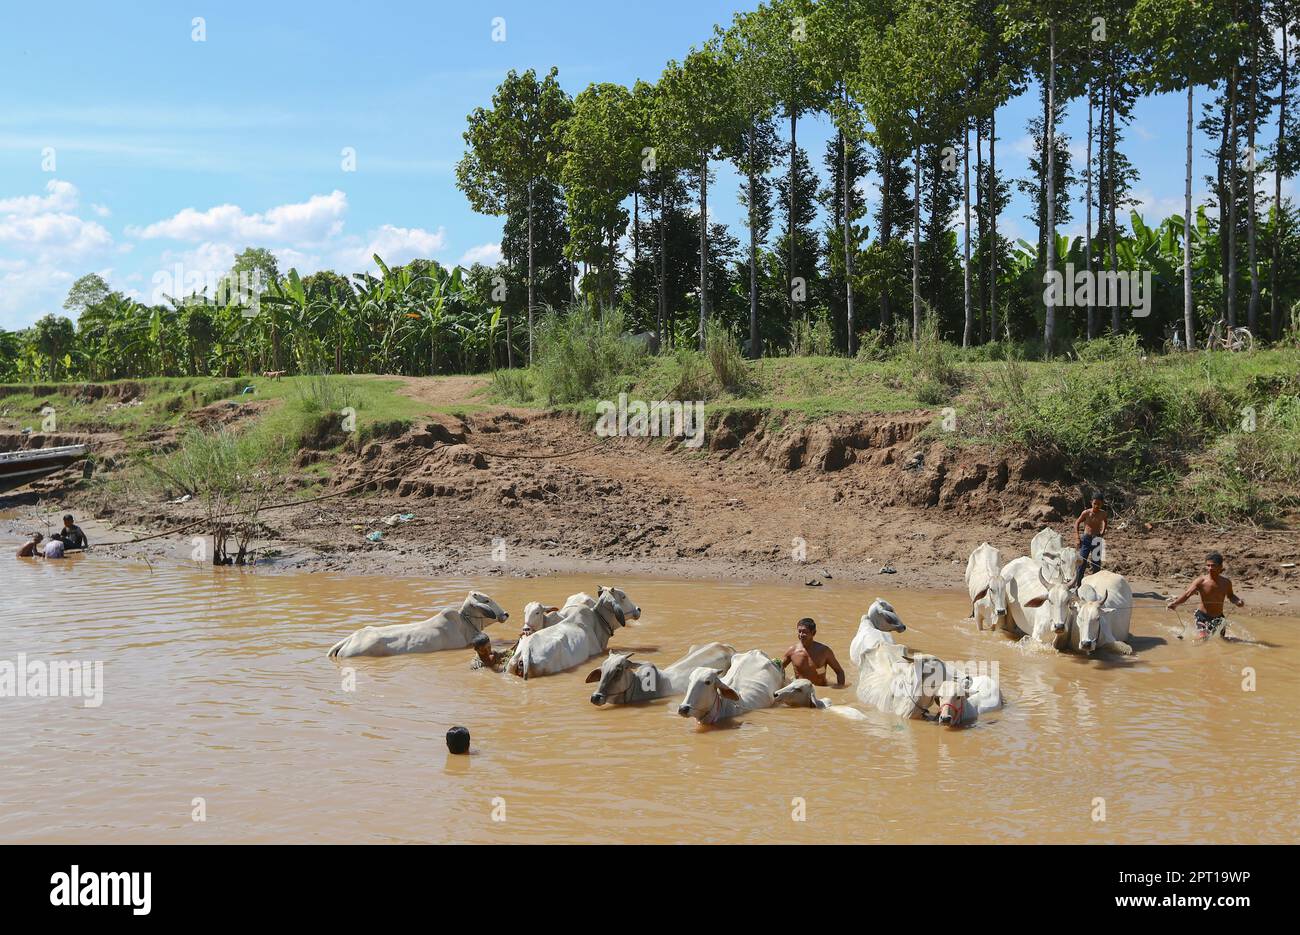 Khmer farmers wash their oxen & cows to cool them in Mekong river water, Cambodia, rural life, ox bath, heatwave in Asia, heat wave records, Kampuchea Stock Photo